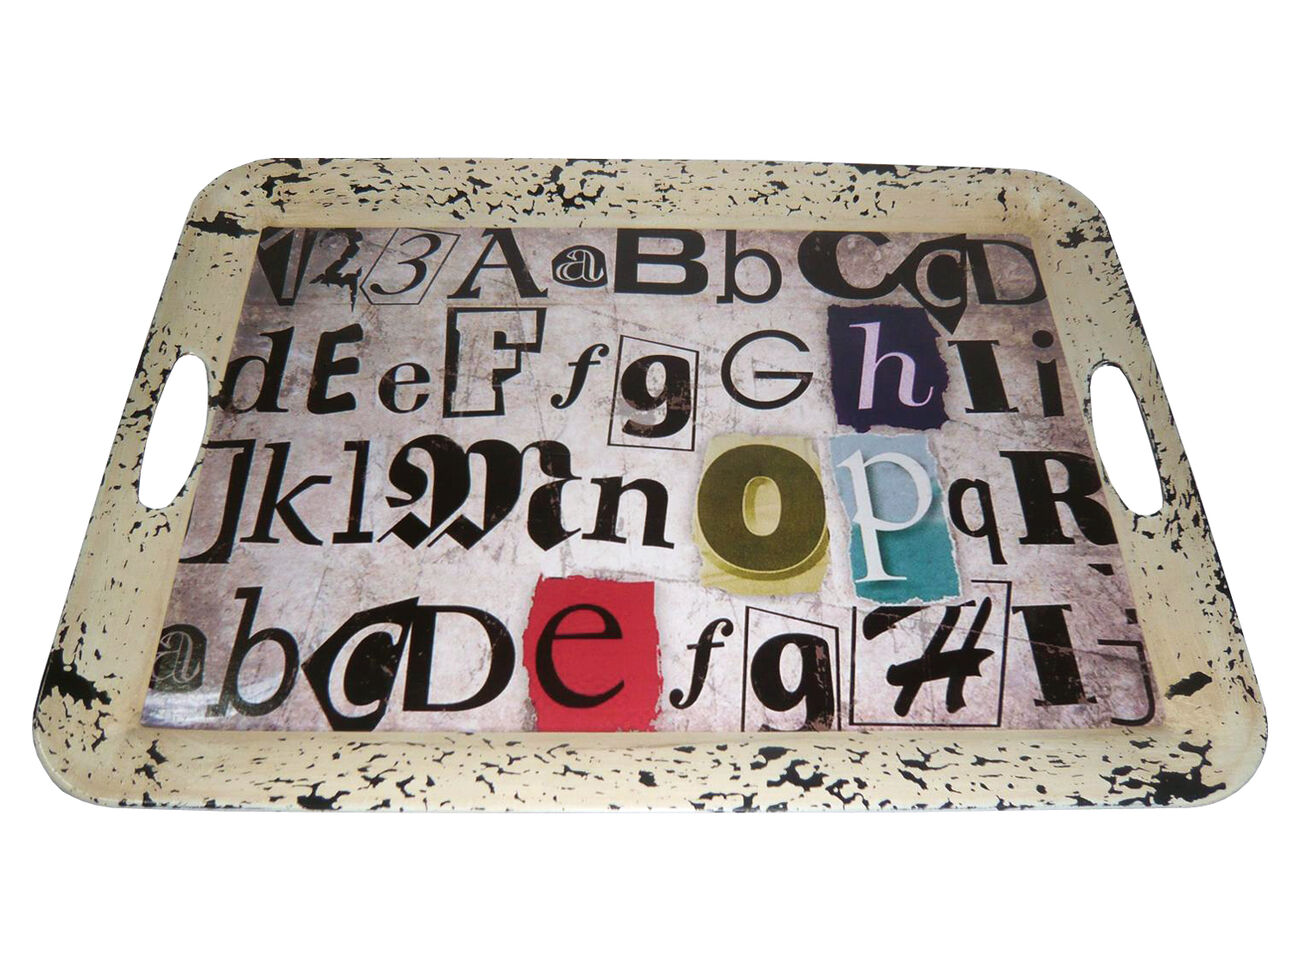 Rugged Designed Tray with Typography Print and Curved Edges, Multicolor